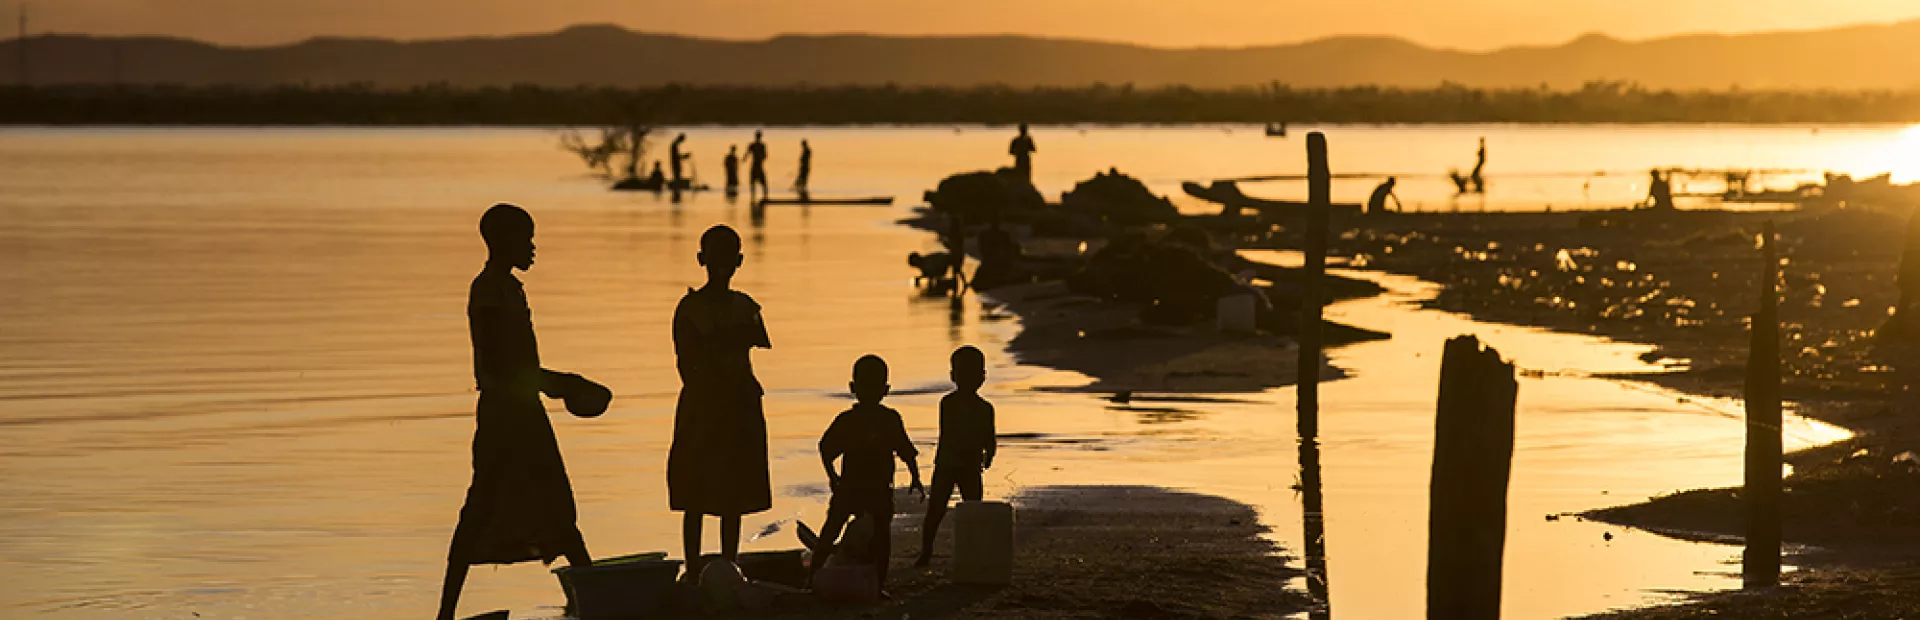 People silhouetted against the sunset on the shore of Lake Victoria, Kenya 